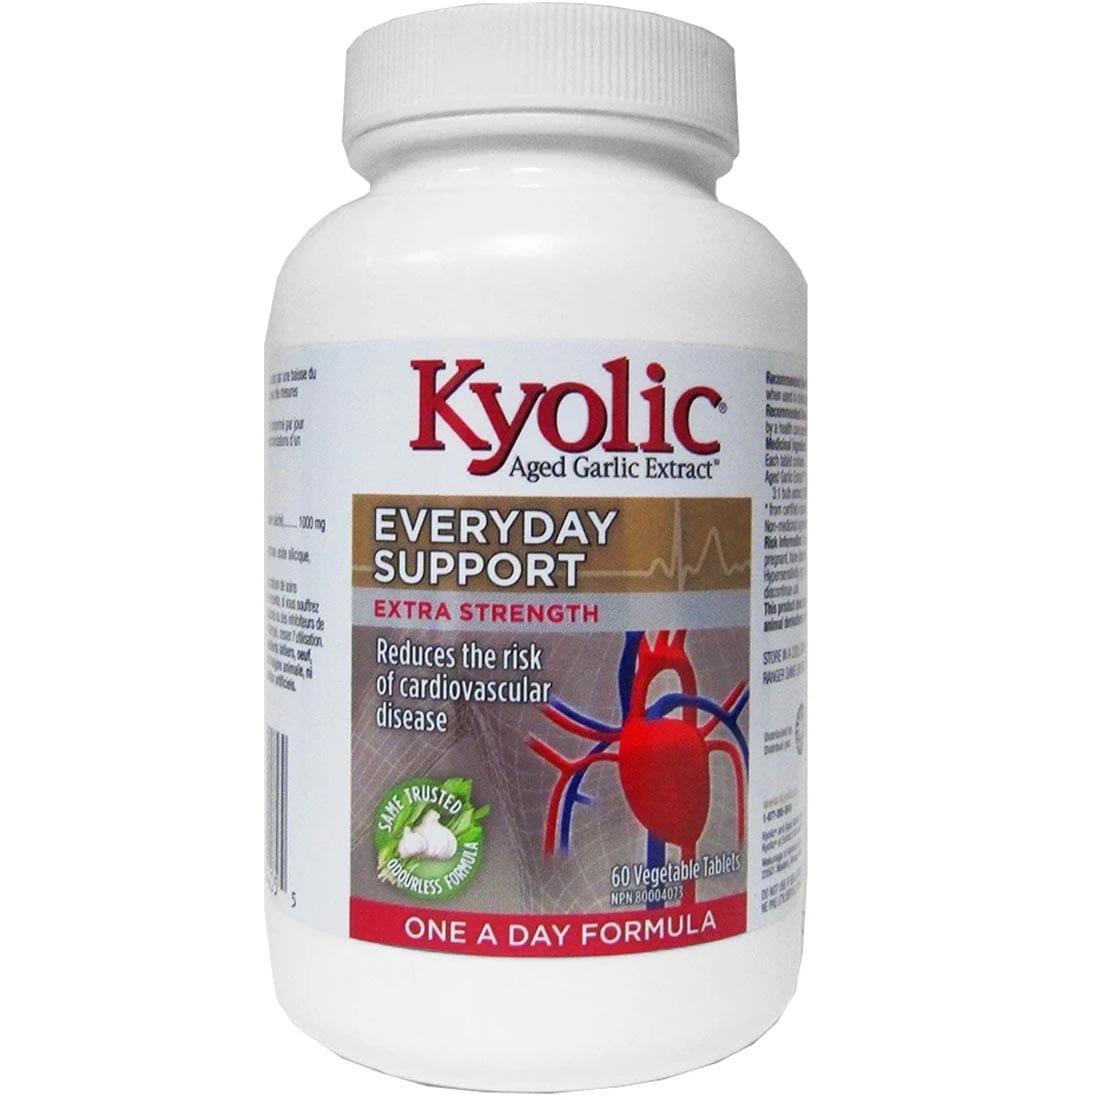 Kyolic Aged Garlic Extract, Everyday Support, Extra Strength, One A Day, 1000mg